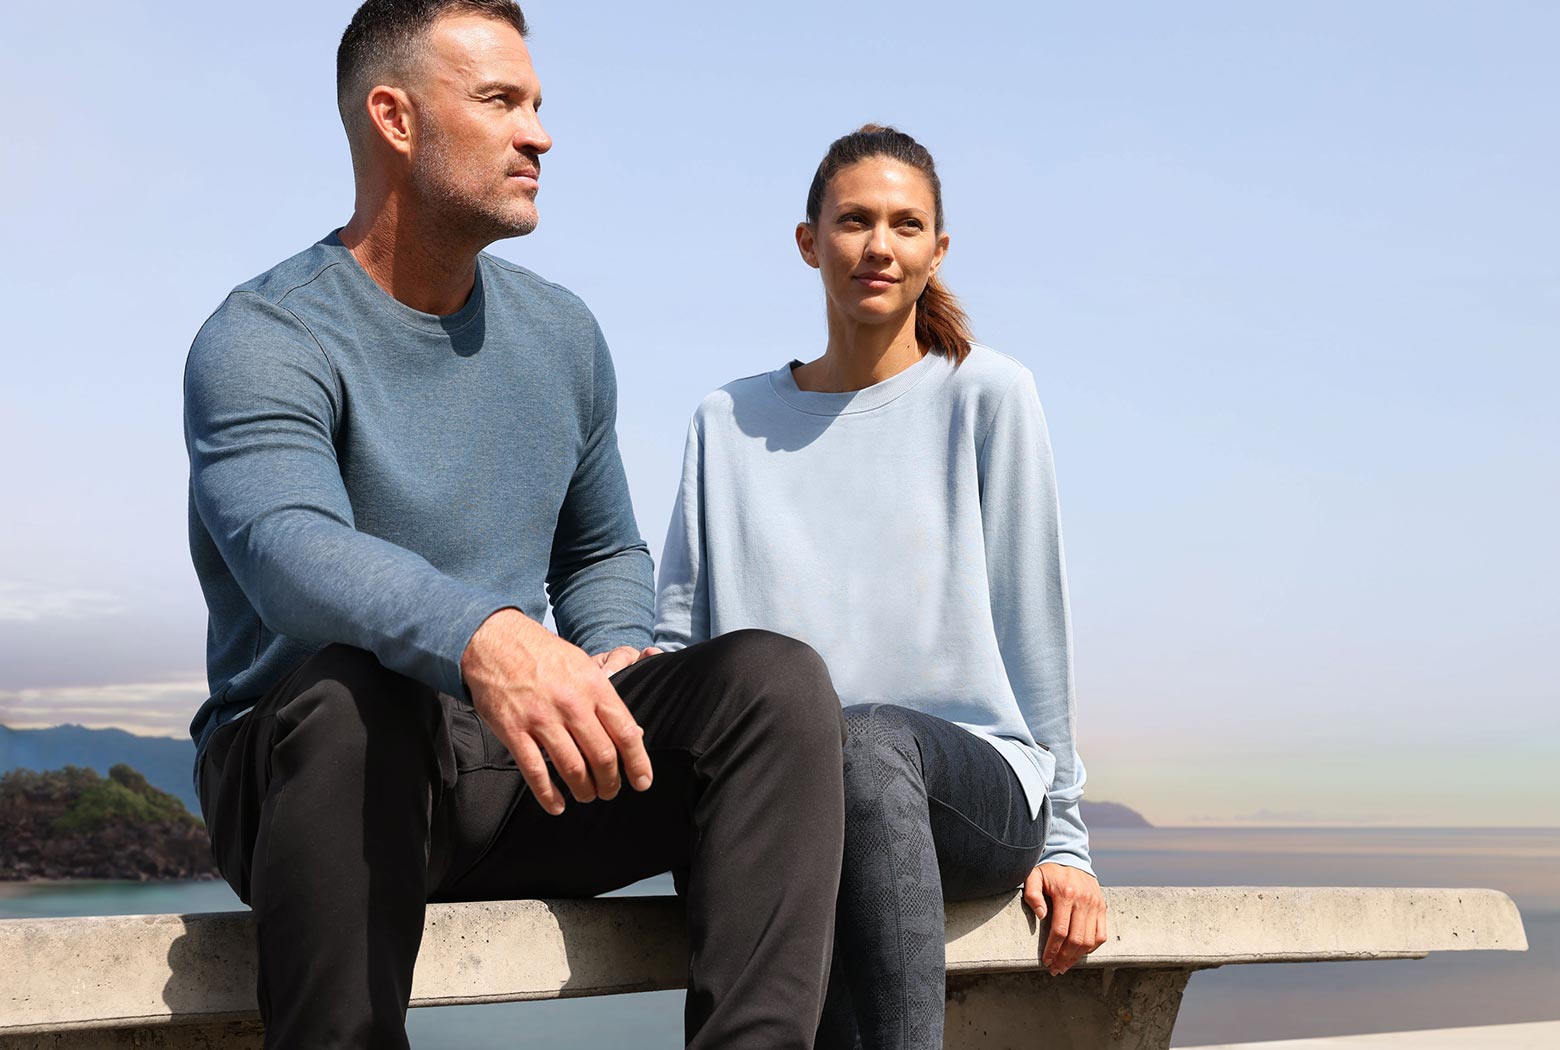 Mondetta man and woman modeling activewear sitting on a bench near the seaside